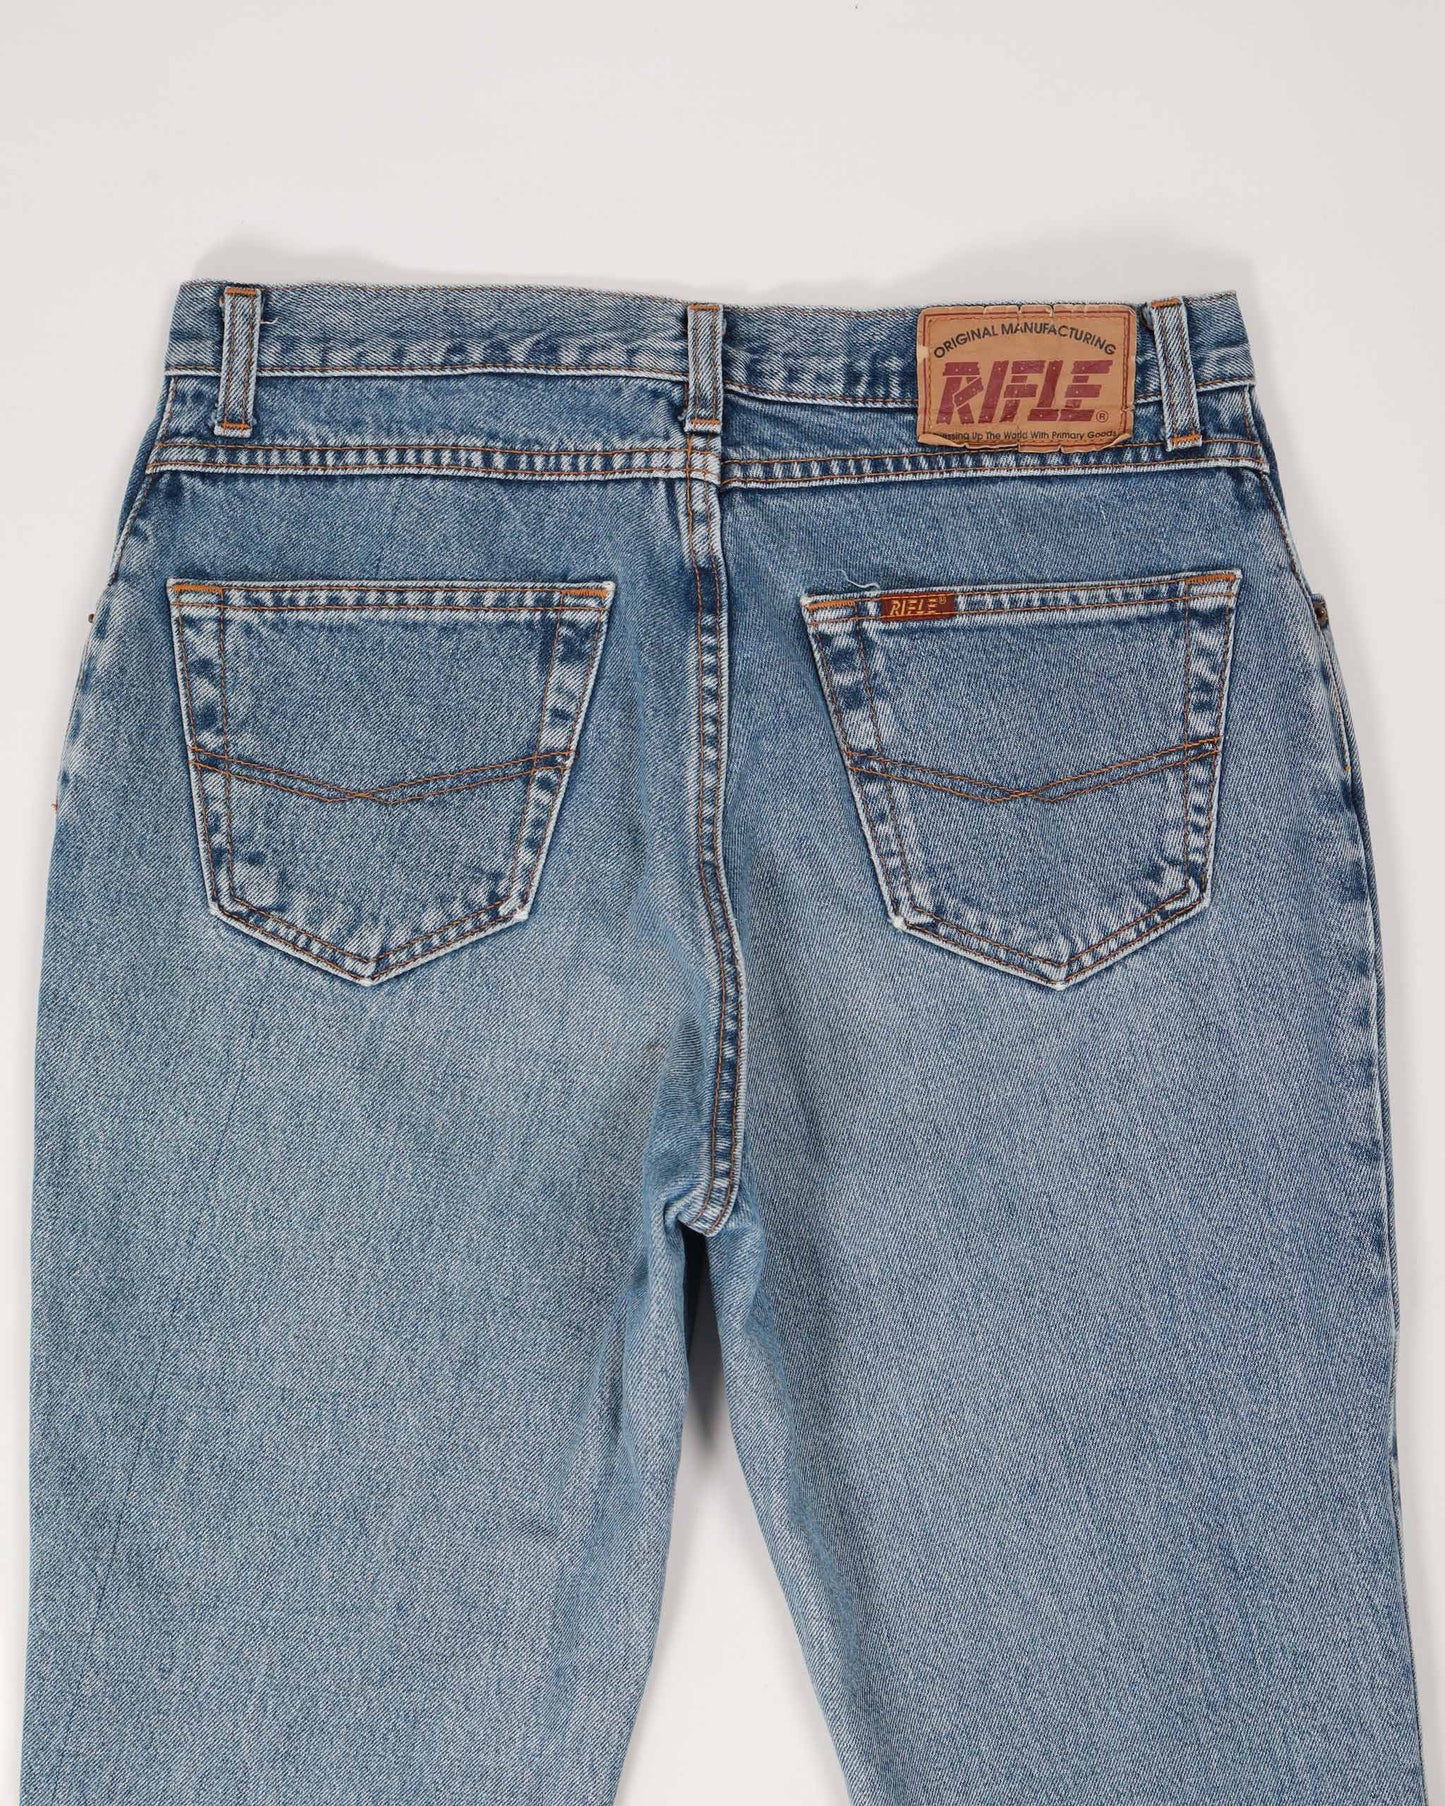 Rifle Tapered Fit Denim Jeans in Blue Size W30